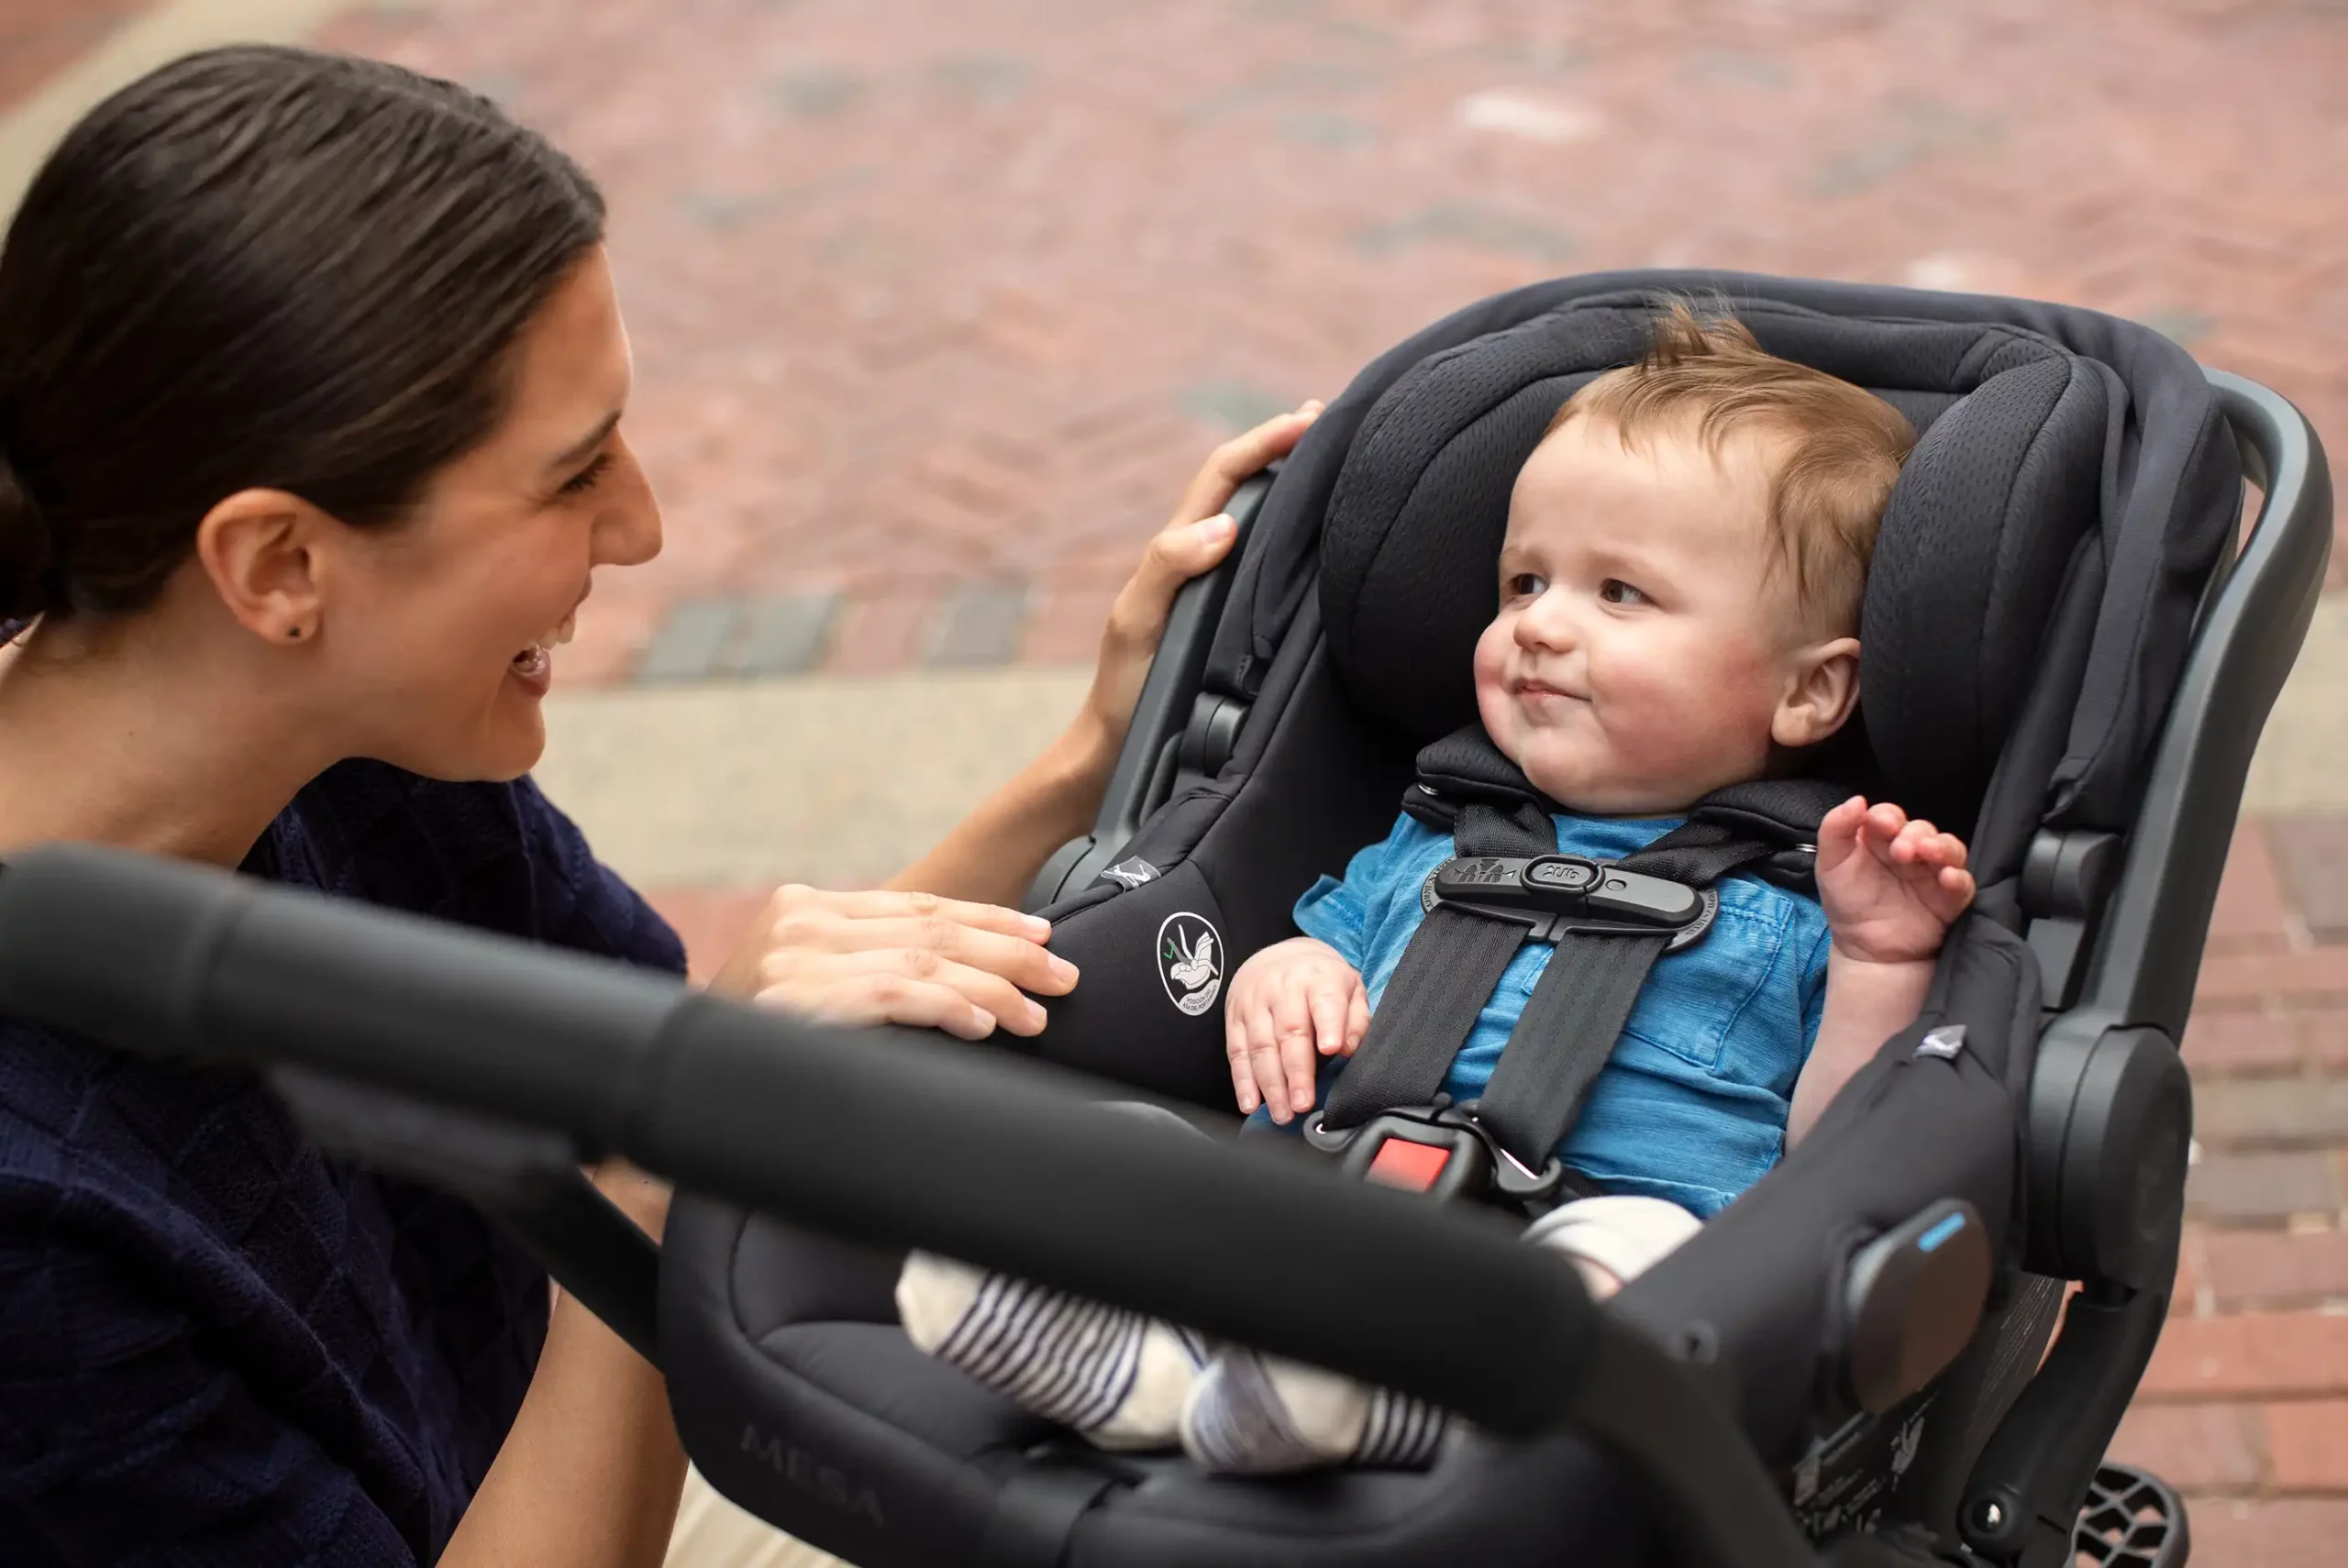 A smiling woman looks at her child securely buckled in the Mesa V2 with its one crotch buckle position and no-rethread, adjustable harness